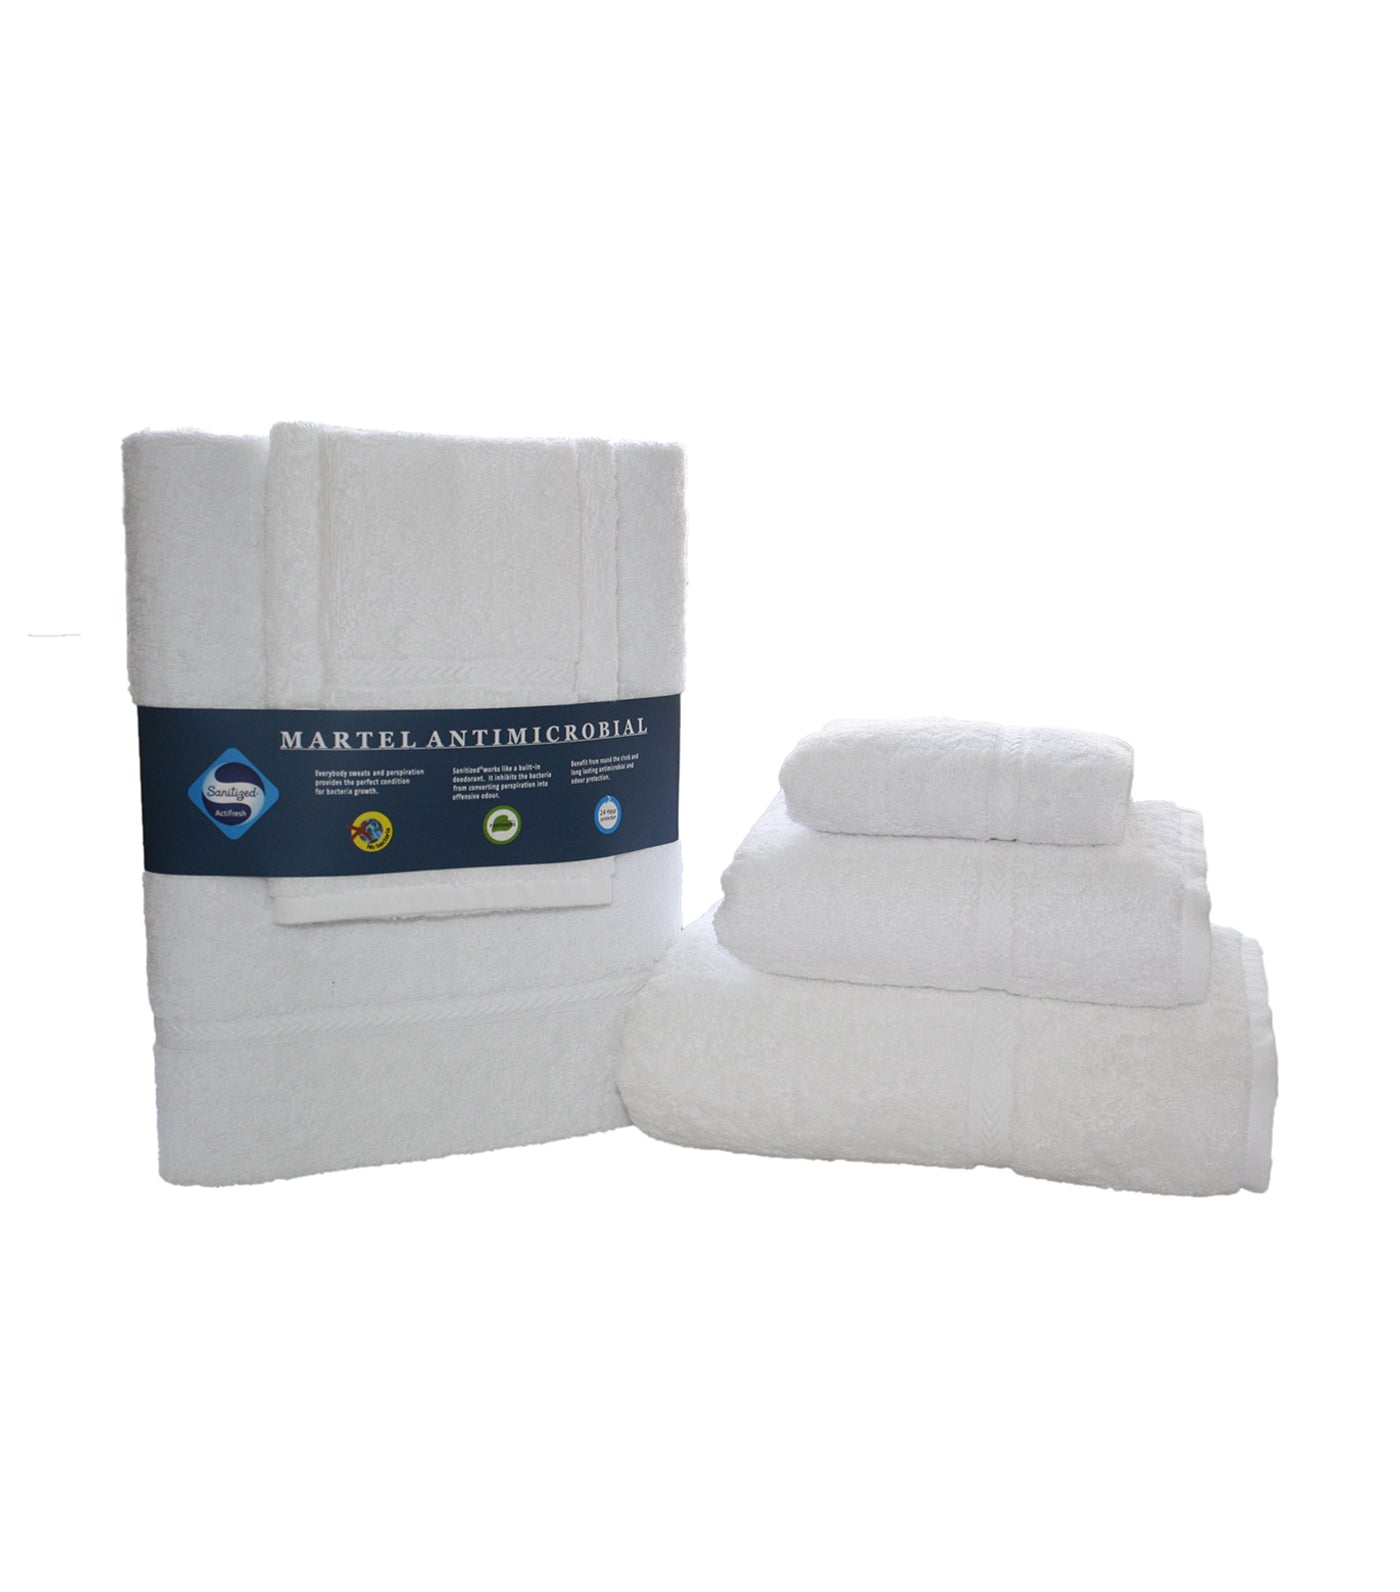 Lacoste Bathroom Towels for sale in the Philippines - Prices and